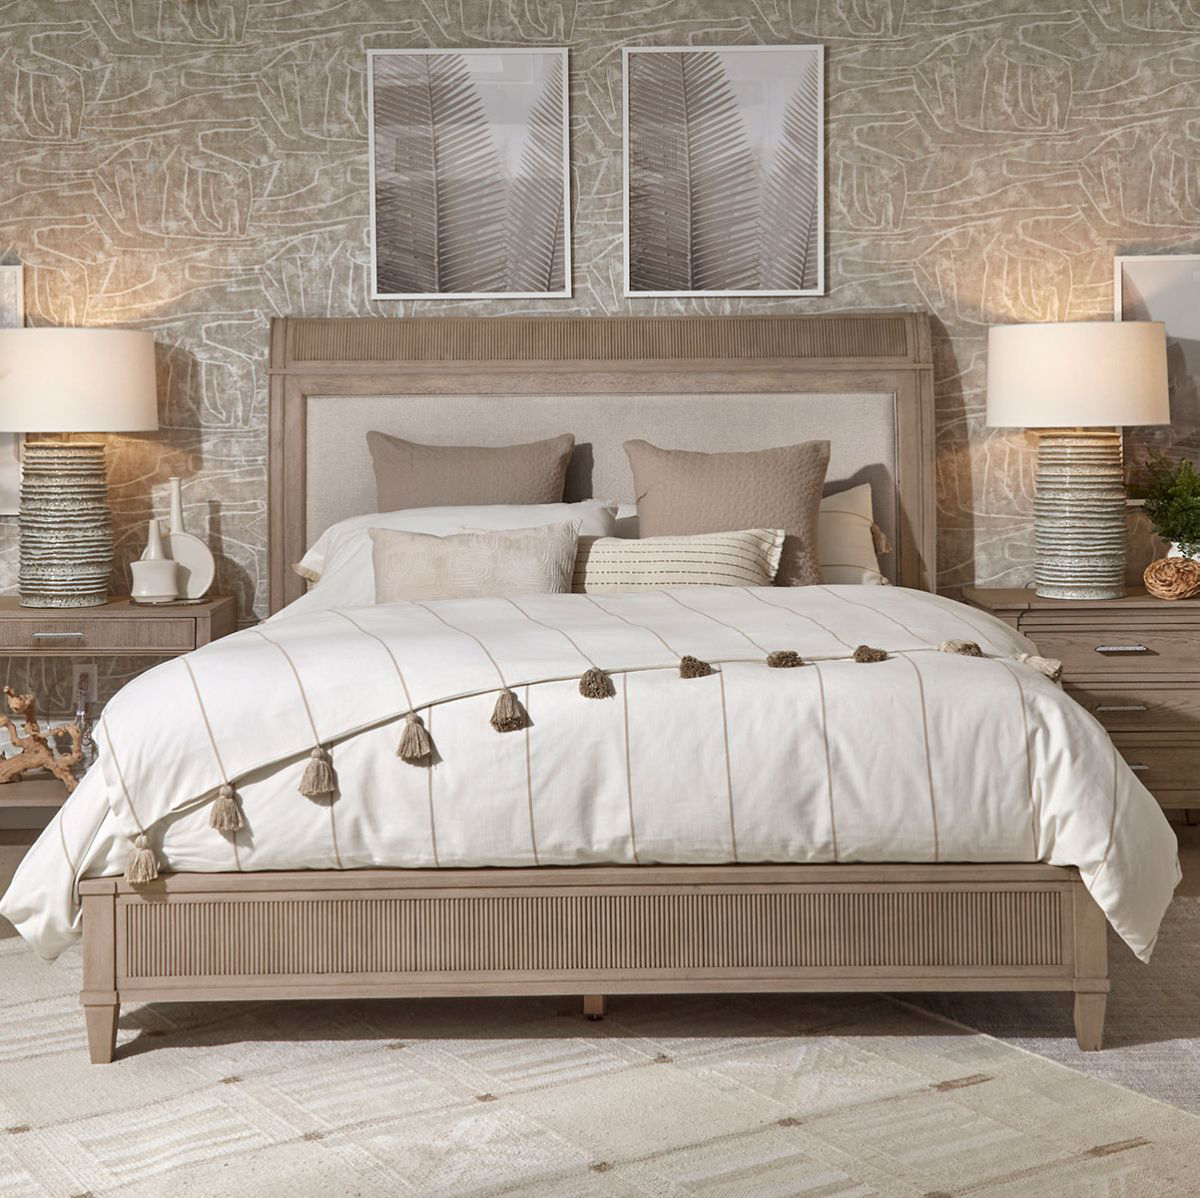 Picture of VITA TAN QUEEN SLEIGH BED